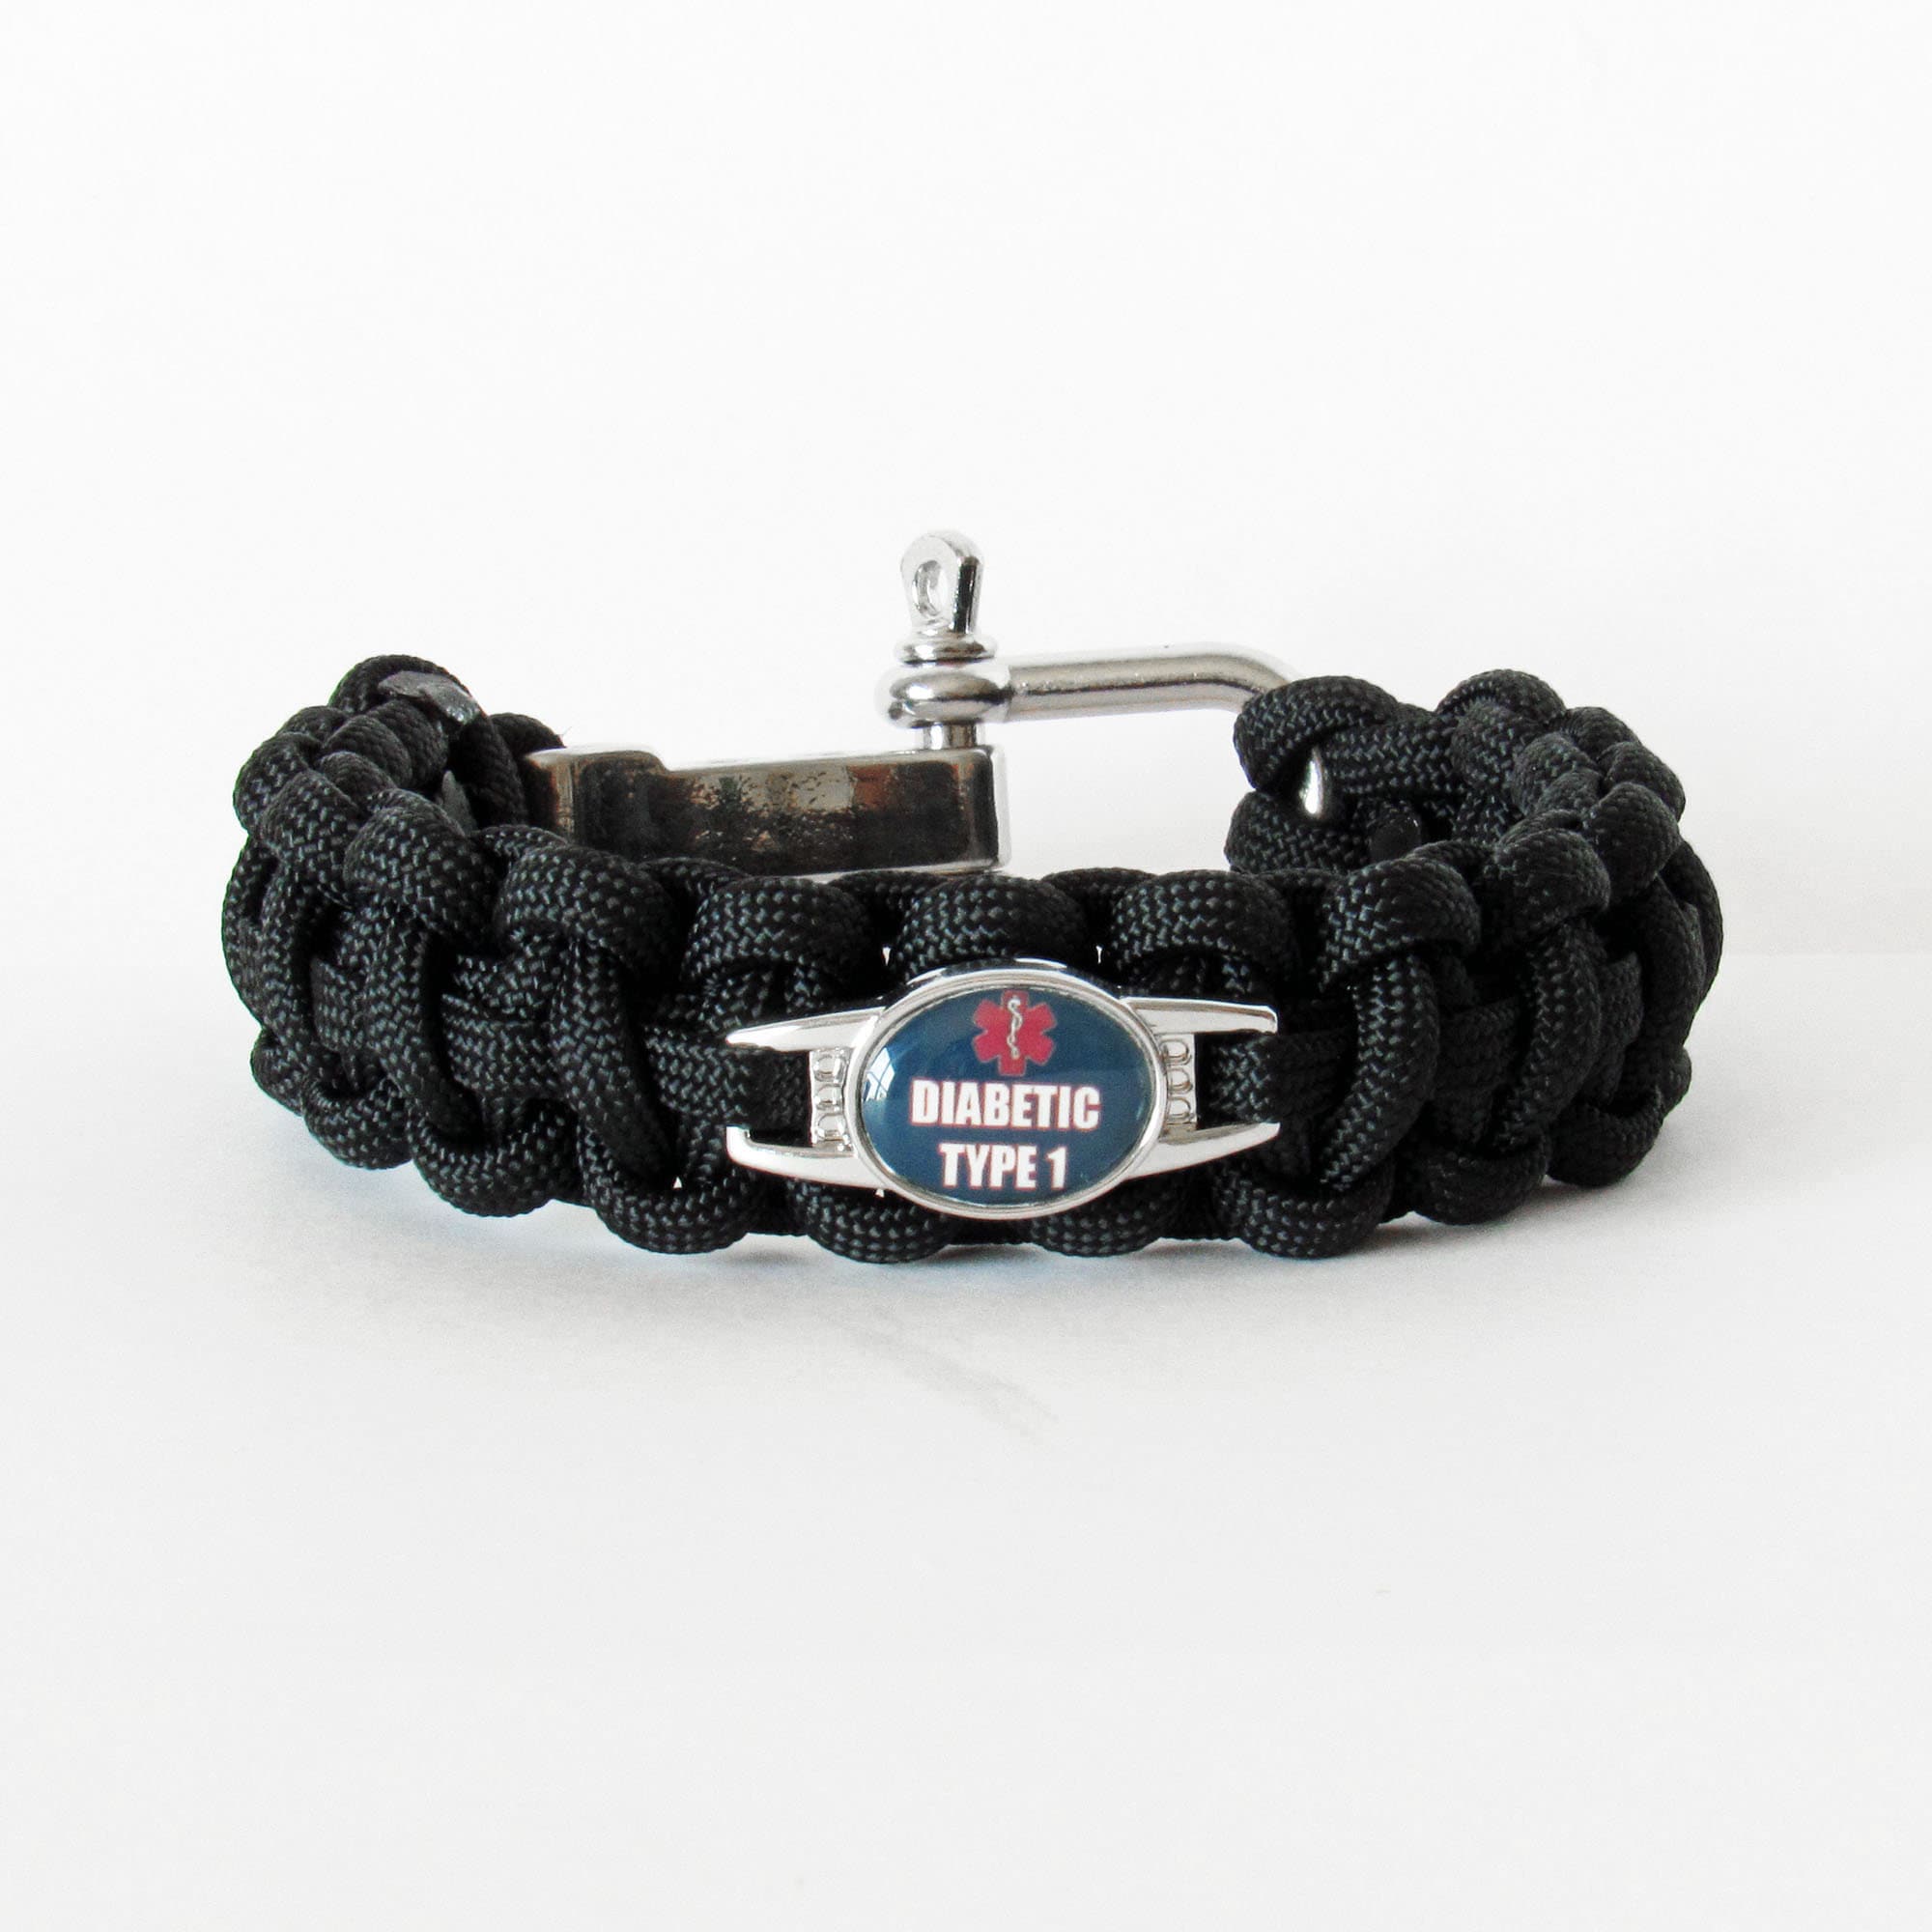 Micro Paracord Bracelet with Engraved Stainless Steel Medical ID